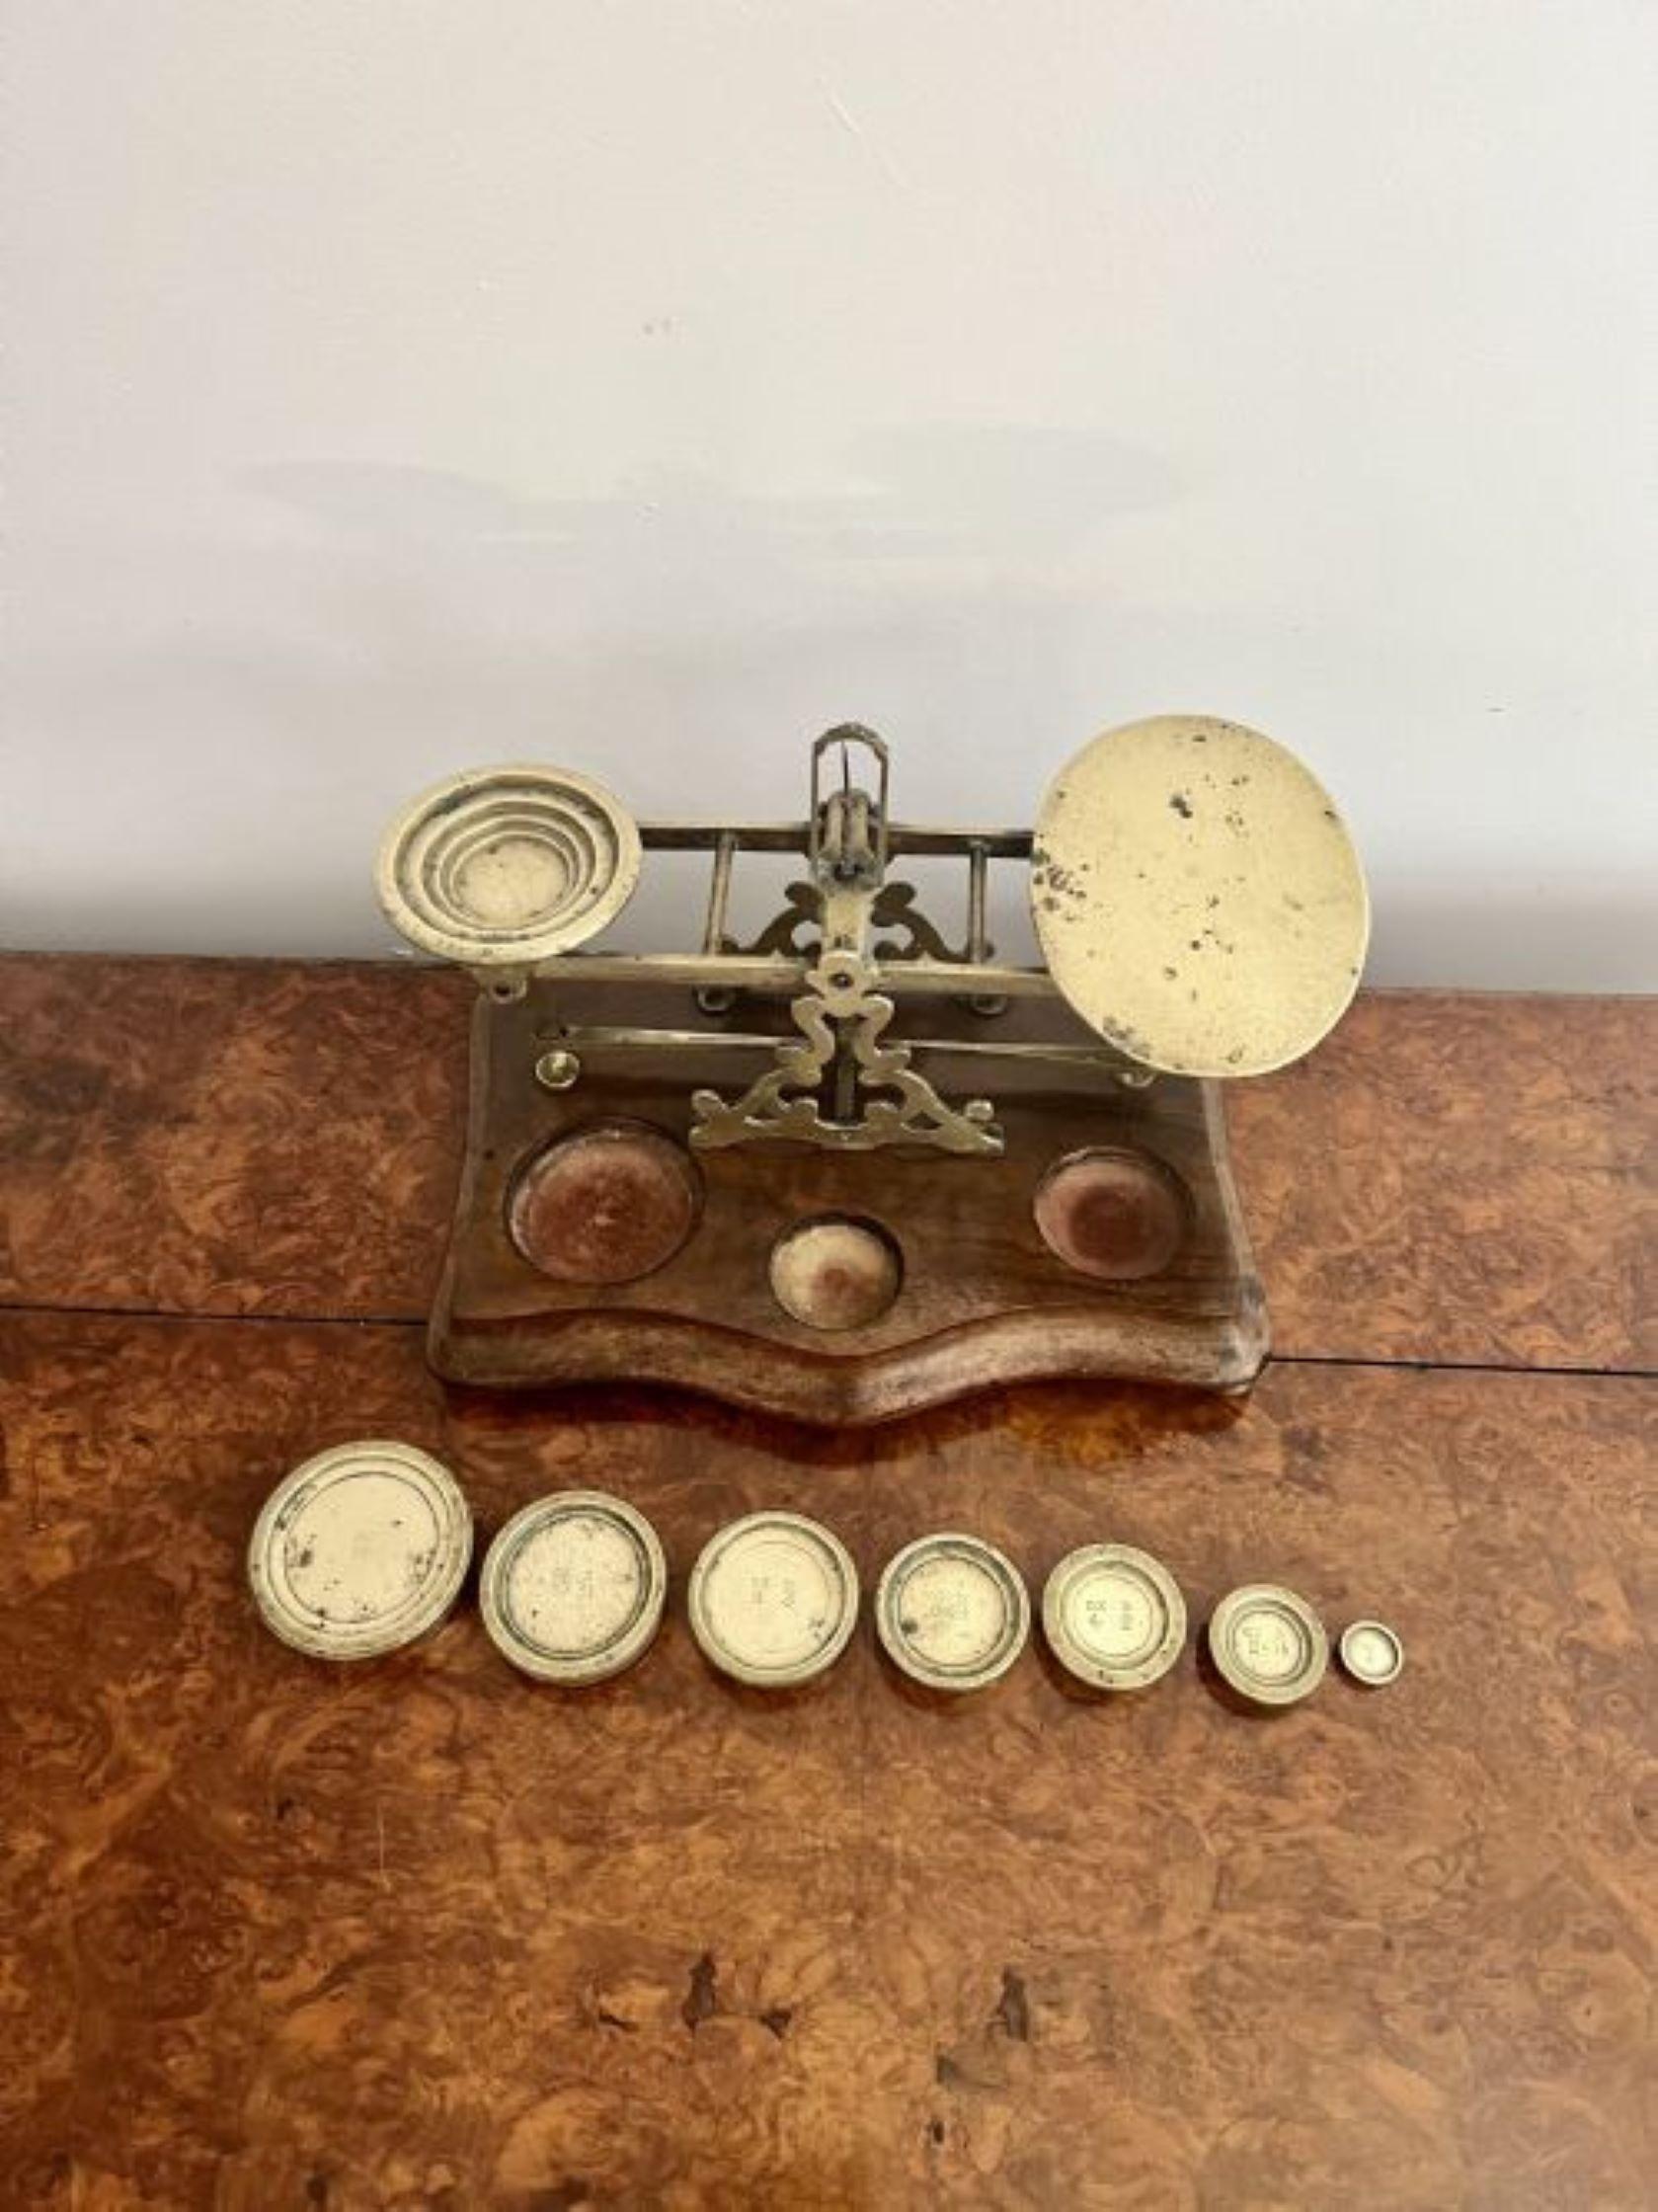 Fantastic set of large antique Victorian postal scales and weights by S.Mordan having a fantastic quality set of antique Victorian scales by S.Mordan & Co London, the brass scales mounted on a walnut base raised on bun feet with the original brass